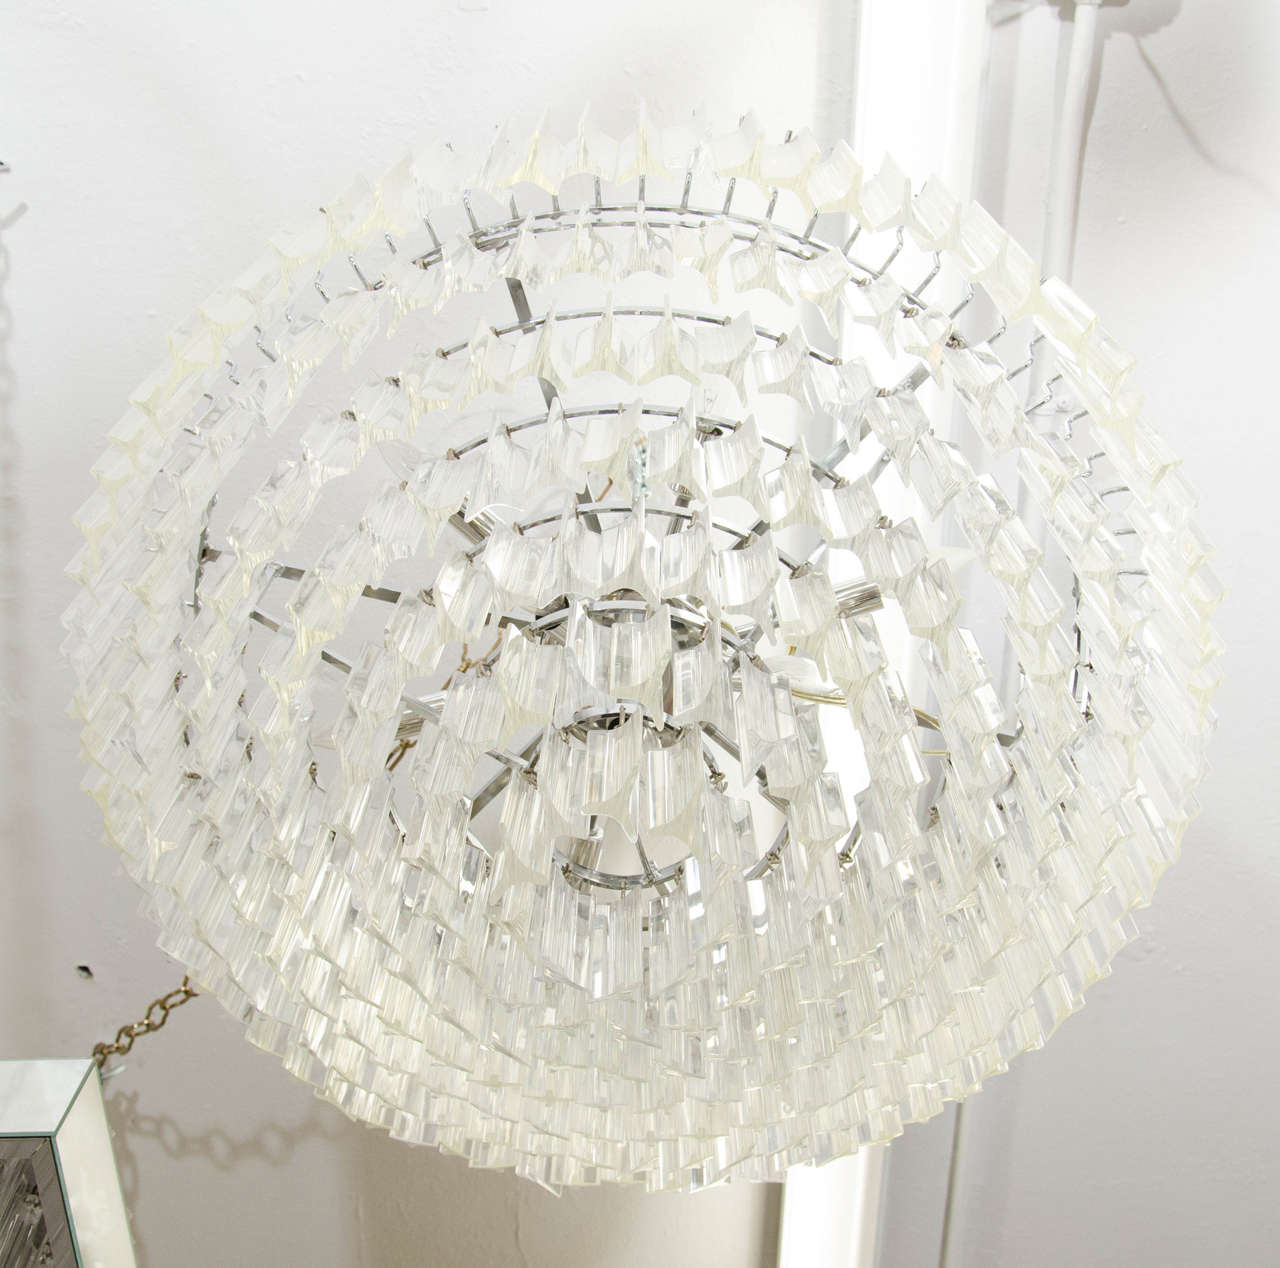 Midcentury large Lucite chandelier in a cascading circular form.